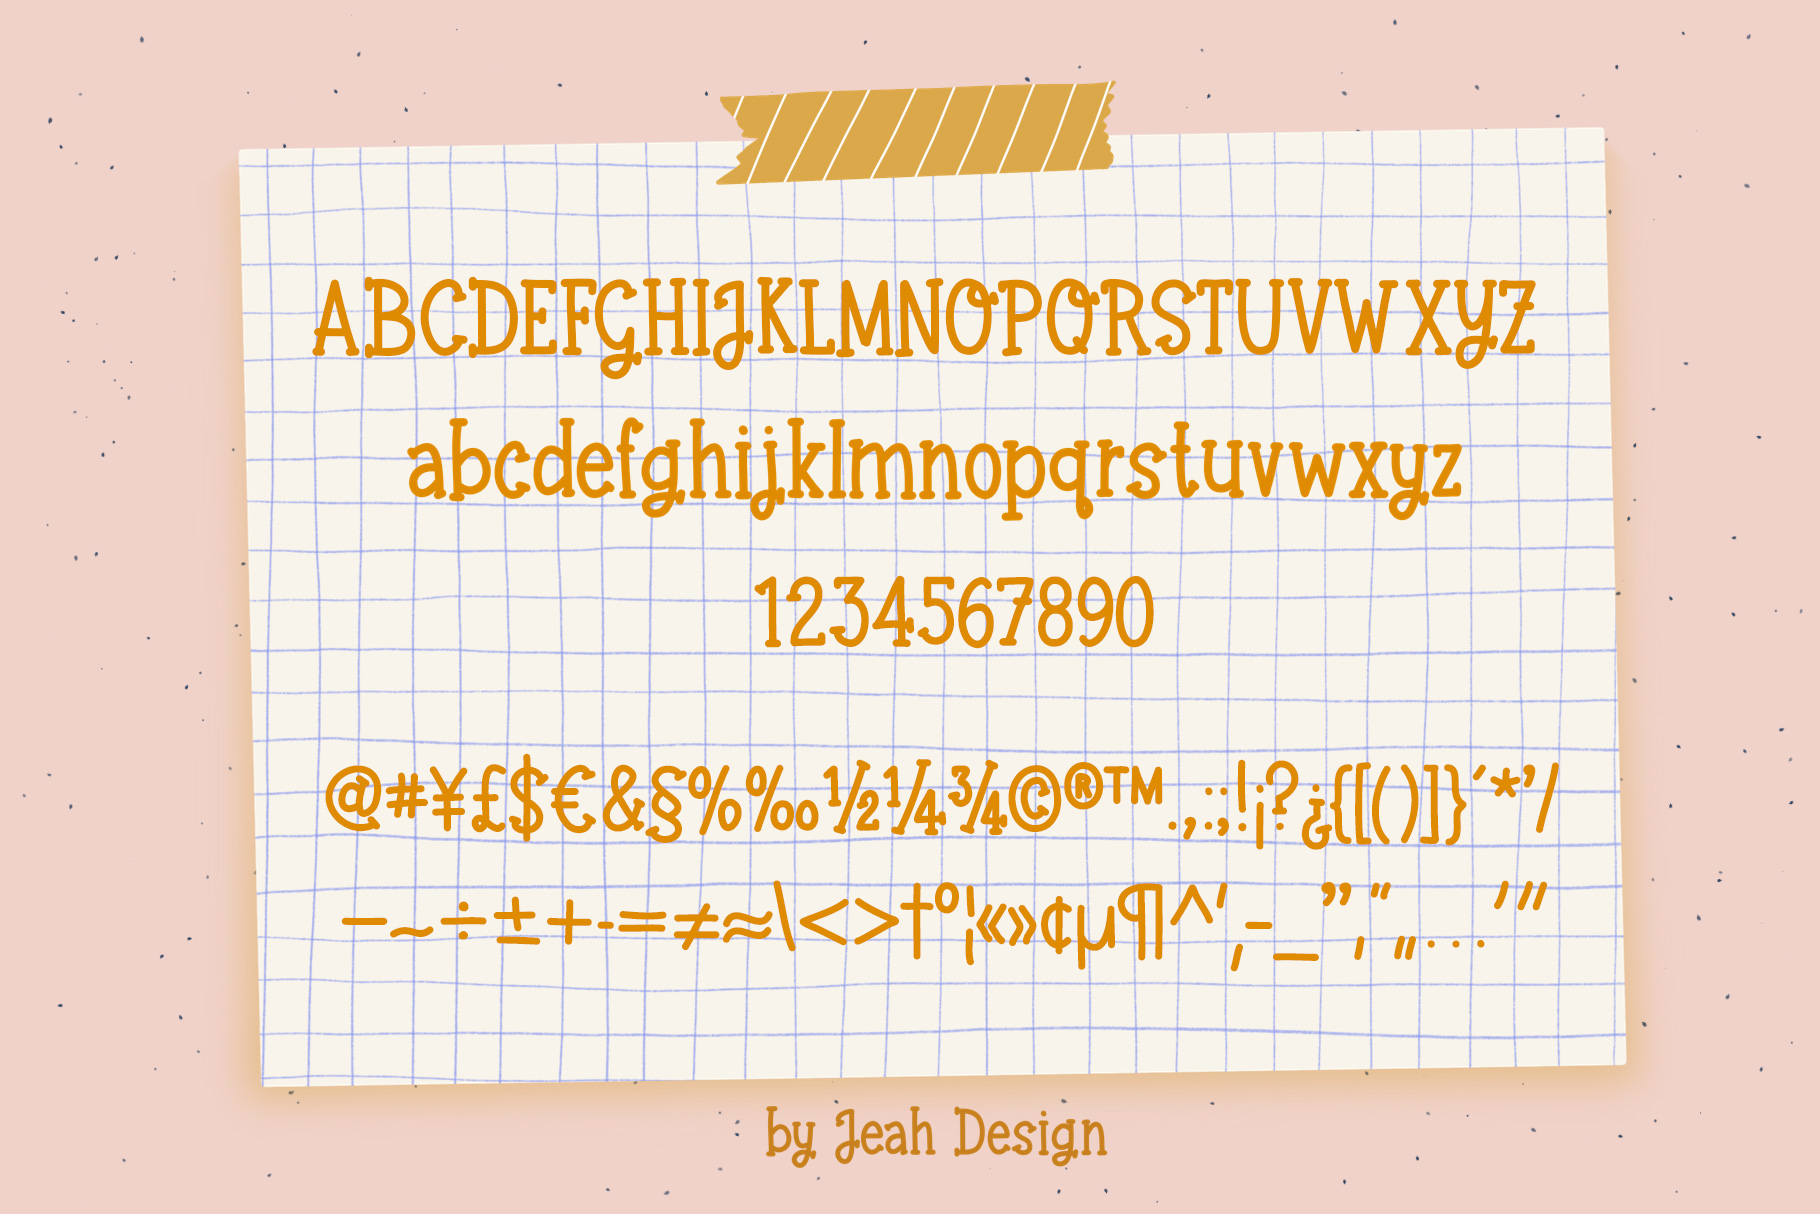 The alphabet and a list of special characters for a typeface called Punch Needle.